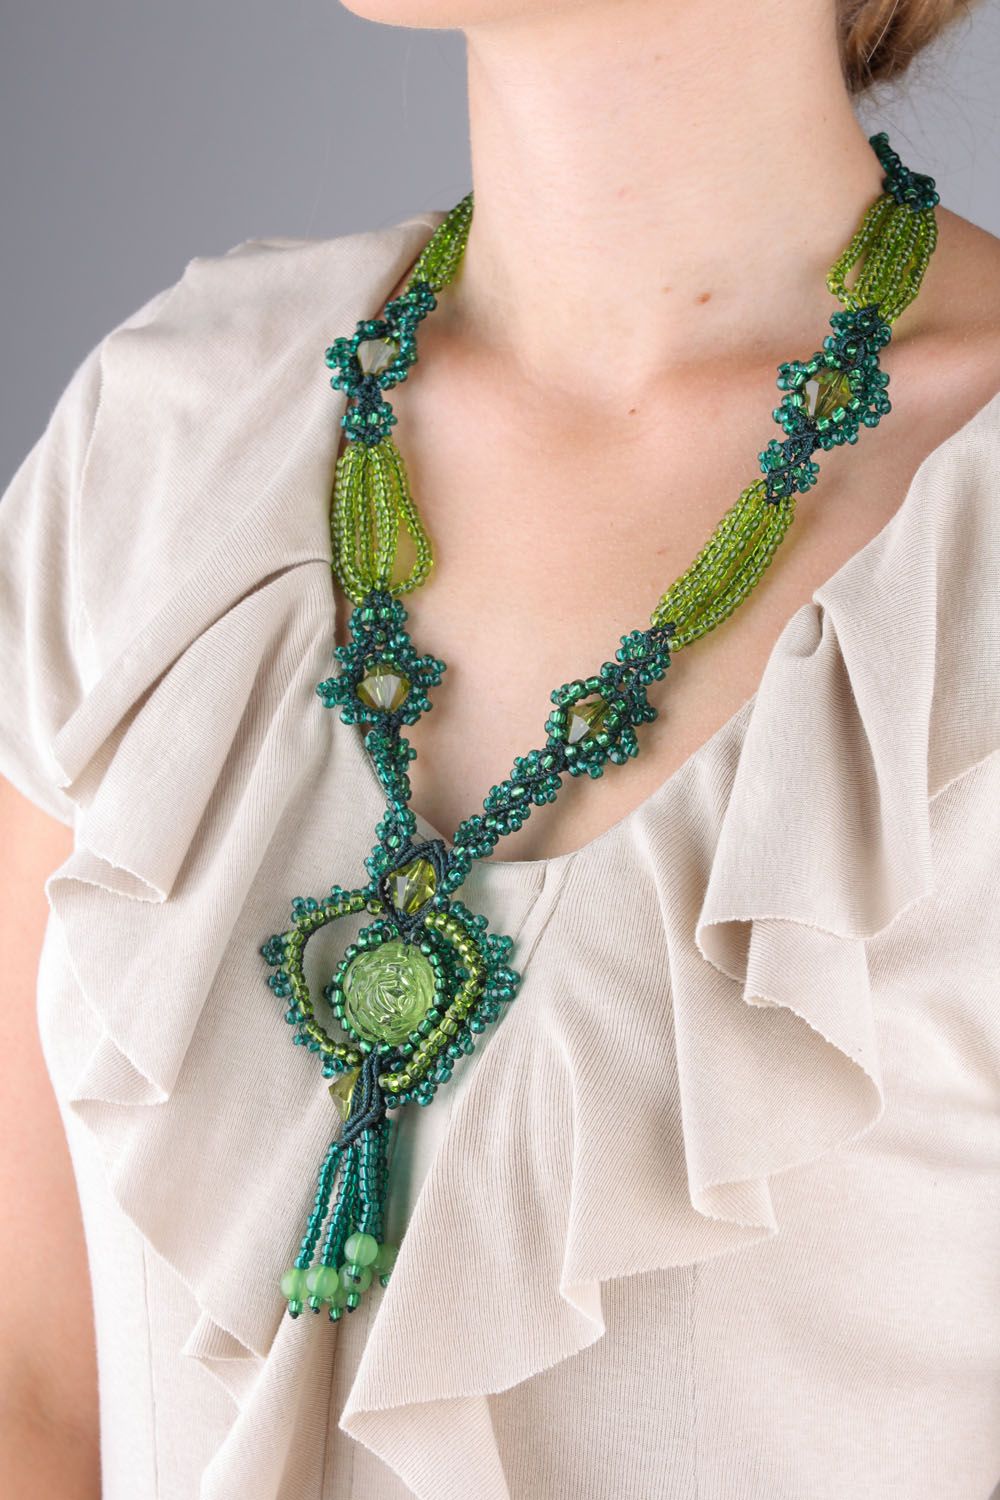 Homemade necklace woven of beads and threads photo 1